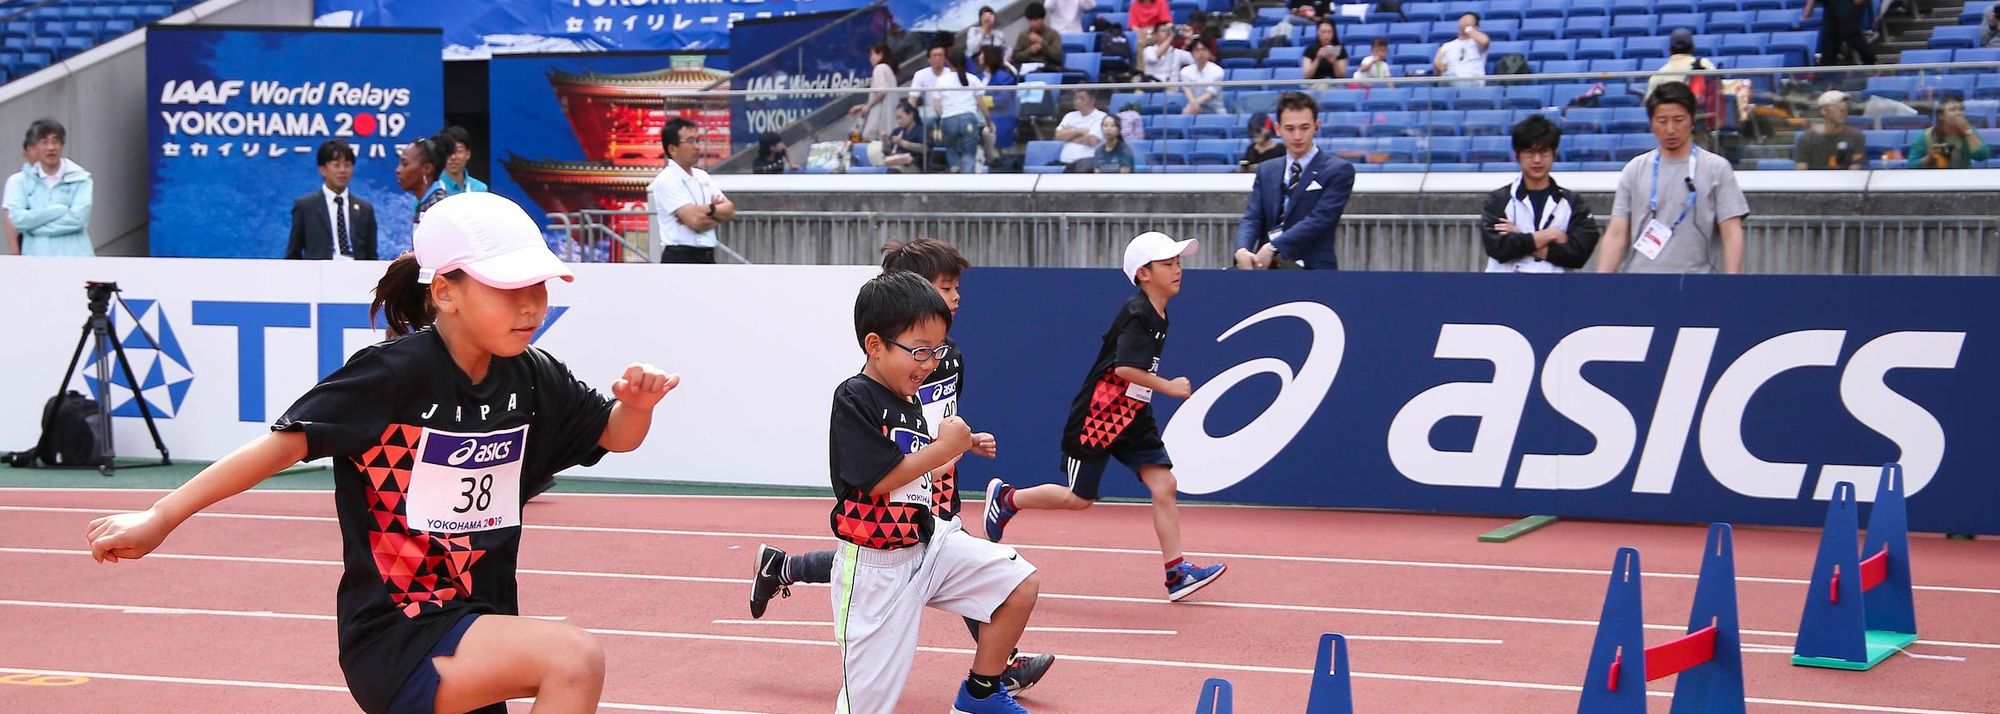 In between sessions at the IAAF World Relays Yokohama 2019, dozens of Japanese schoolchildren took to the track at Yokohama International Stadium to take part in a team competition of their own.